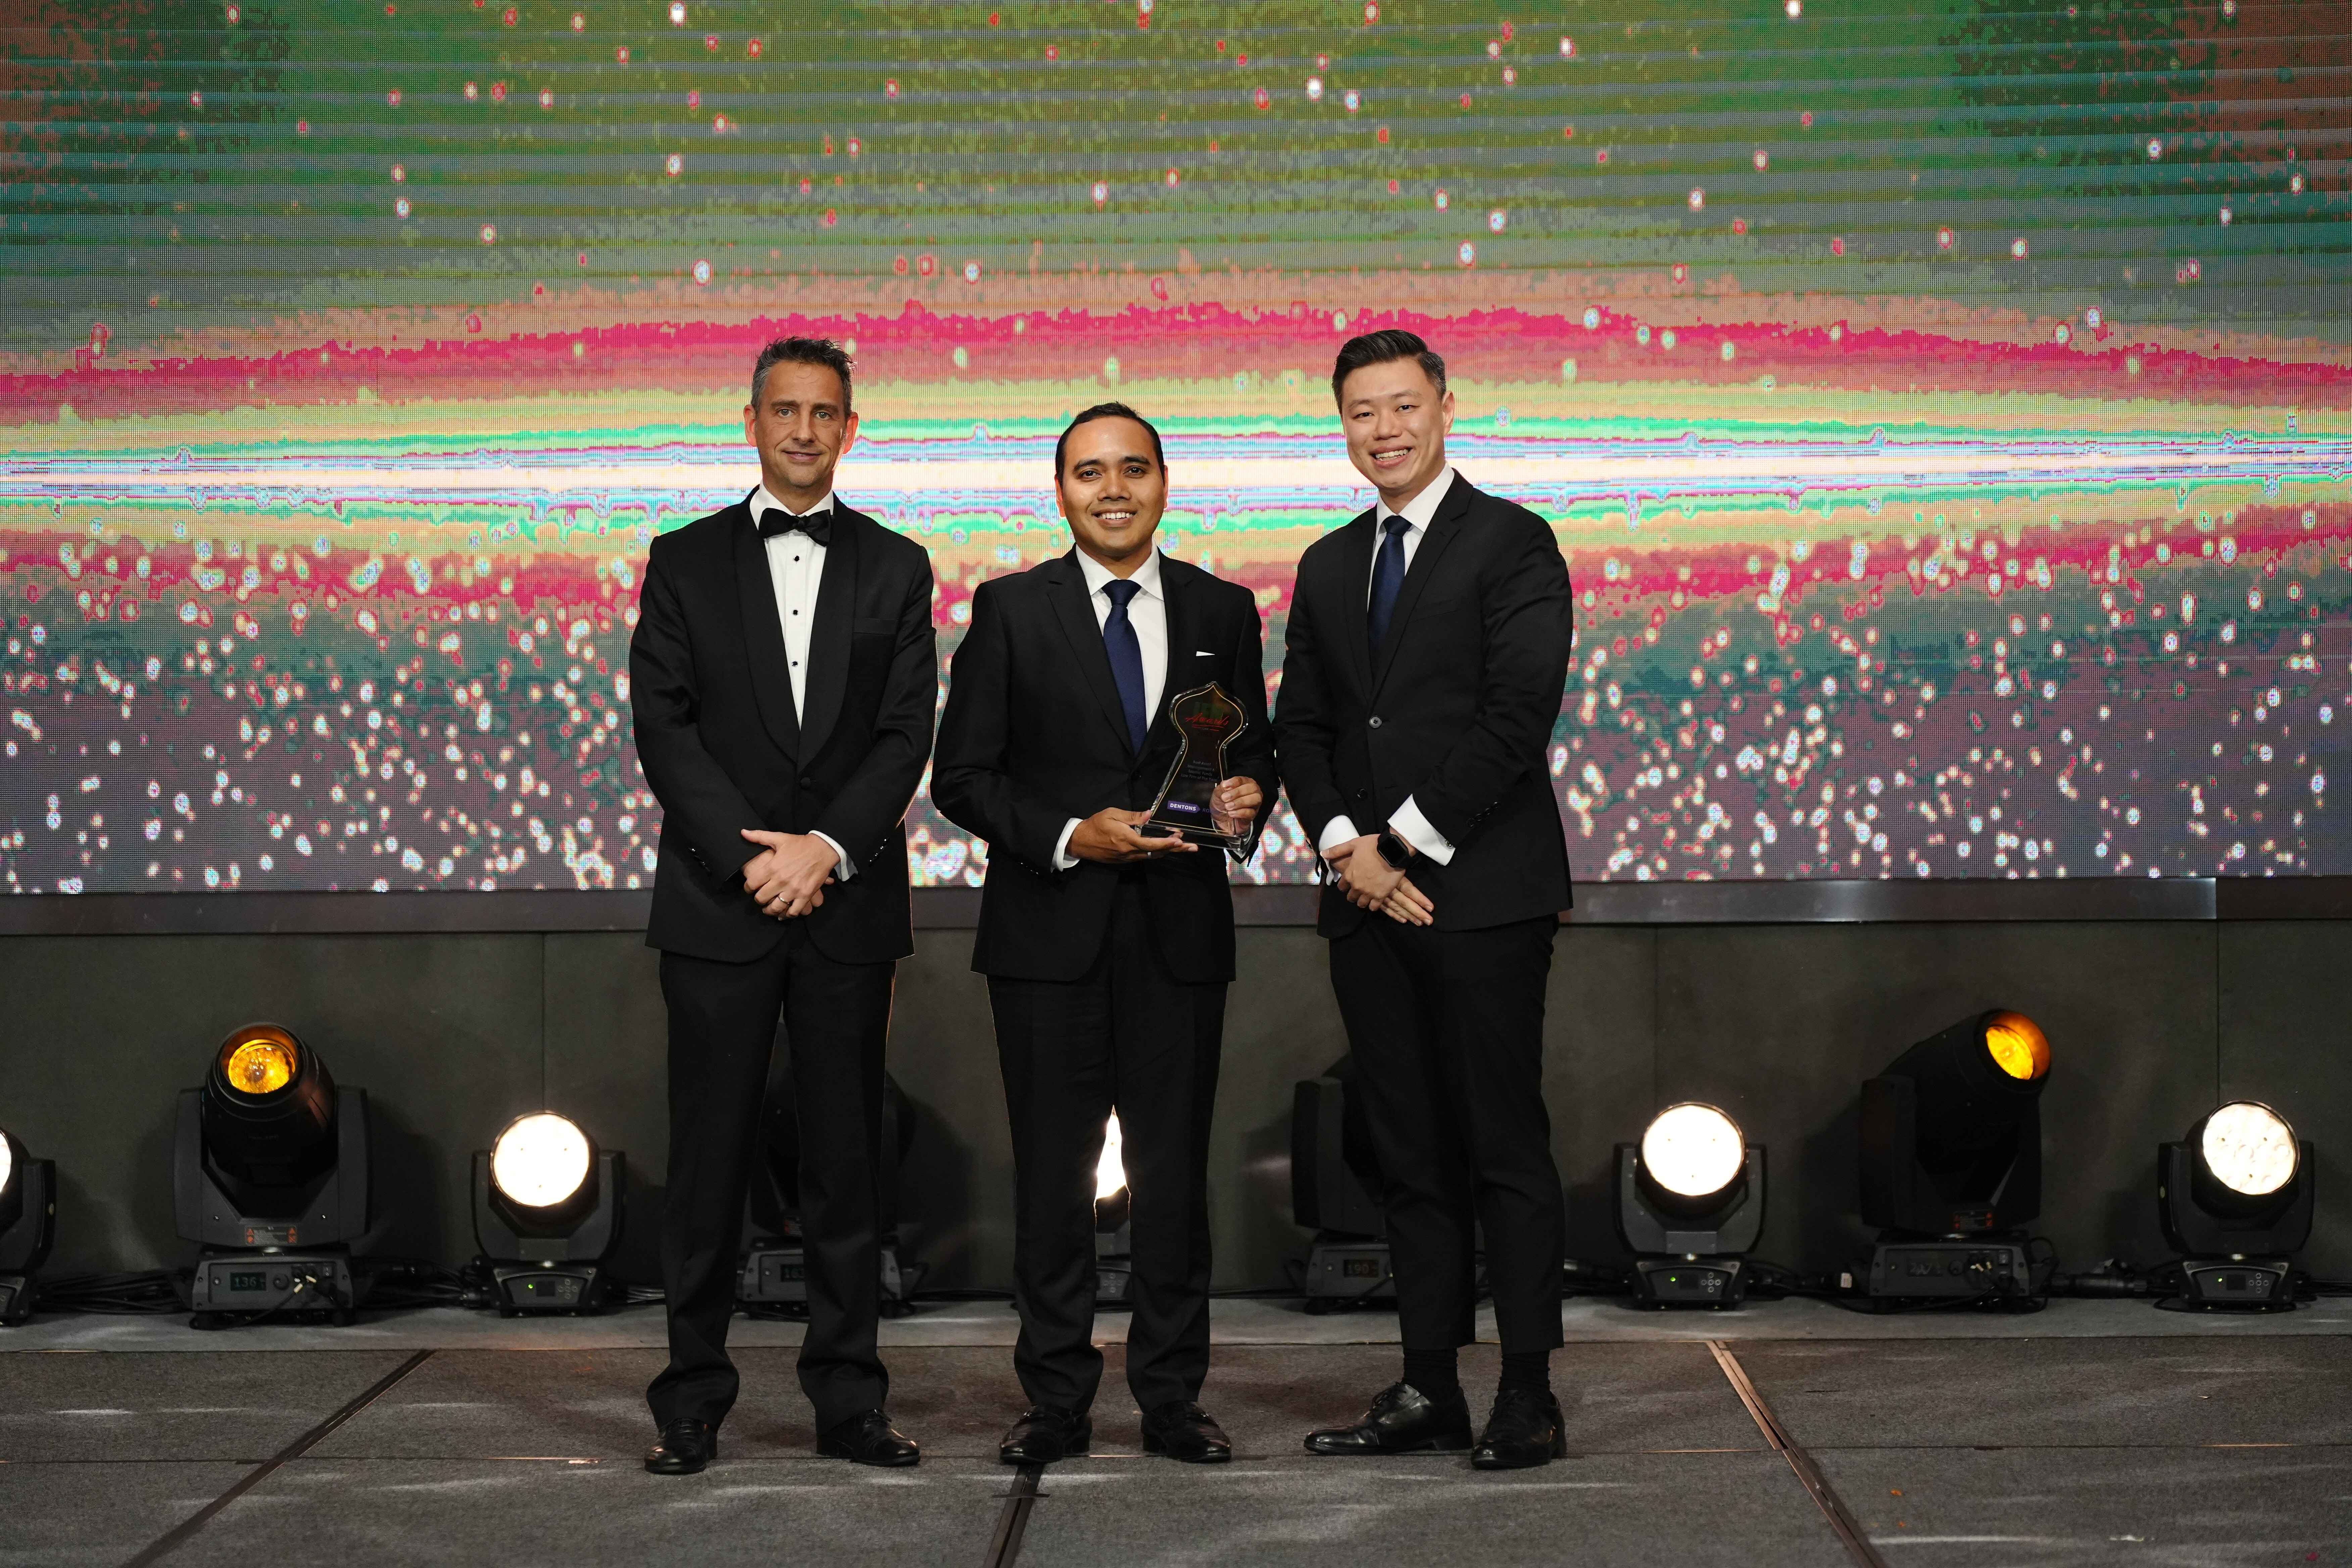 Senior Partner Zhulkarnain Abdul Rahim (centre) and Senior Associate Manfred Lum (right) receive the Asset Management and Islamic Funds Law Firm of the Year award on behalf of the firm